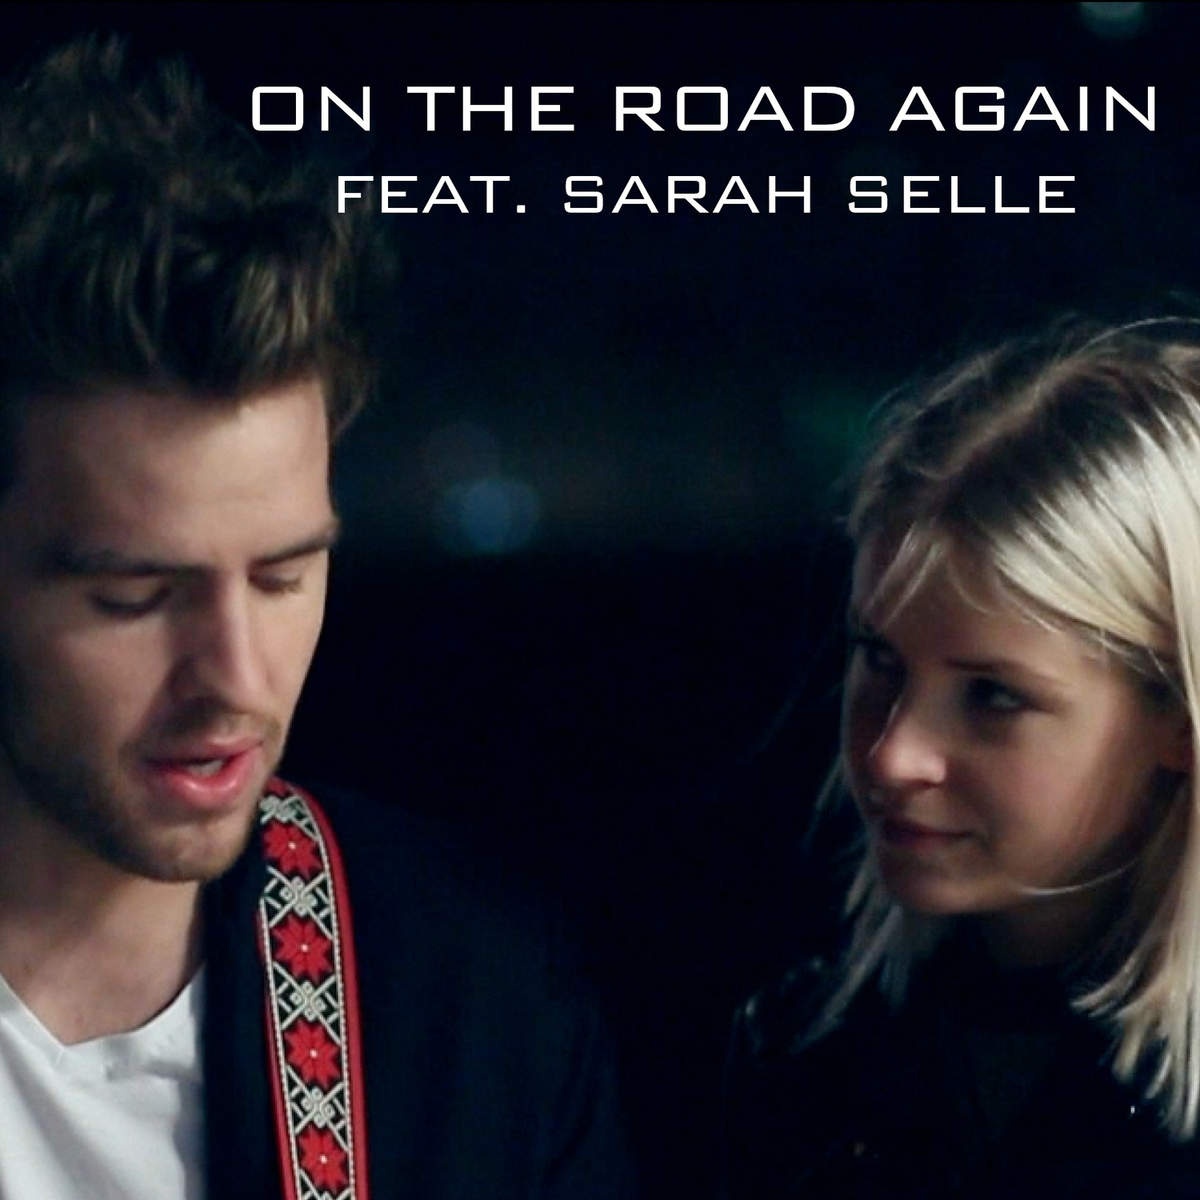 On the Road Again (feat. Sarah Selle) [Acoustic Version]